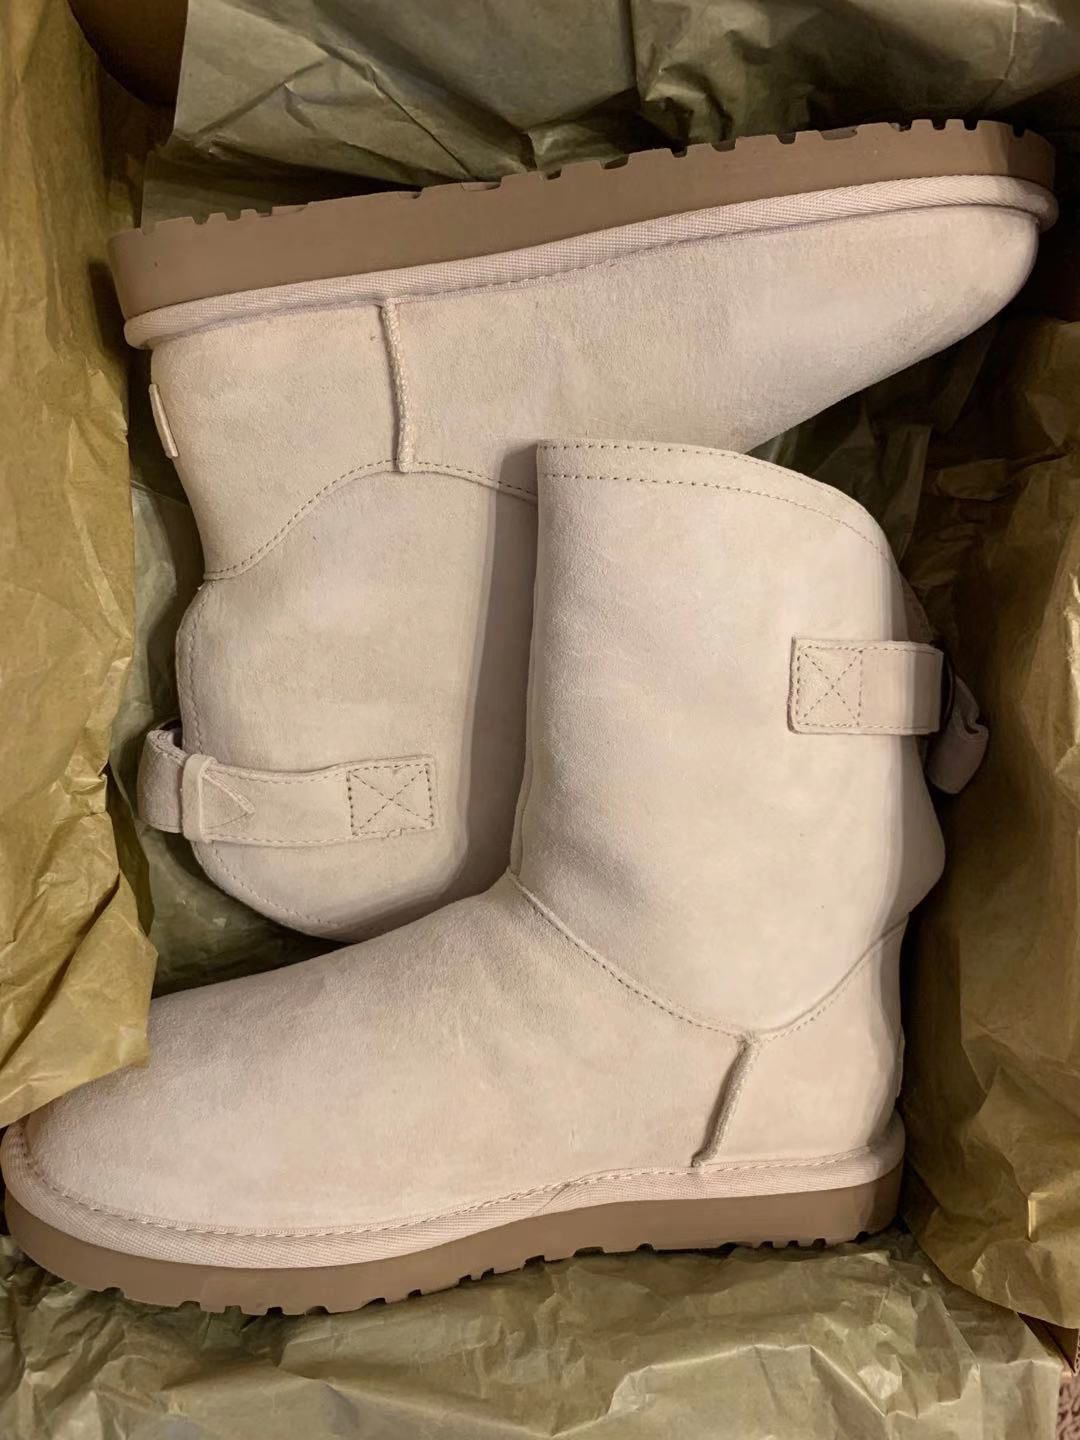 Brand new UGG BOOTS, size 7